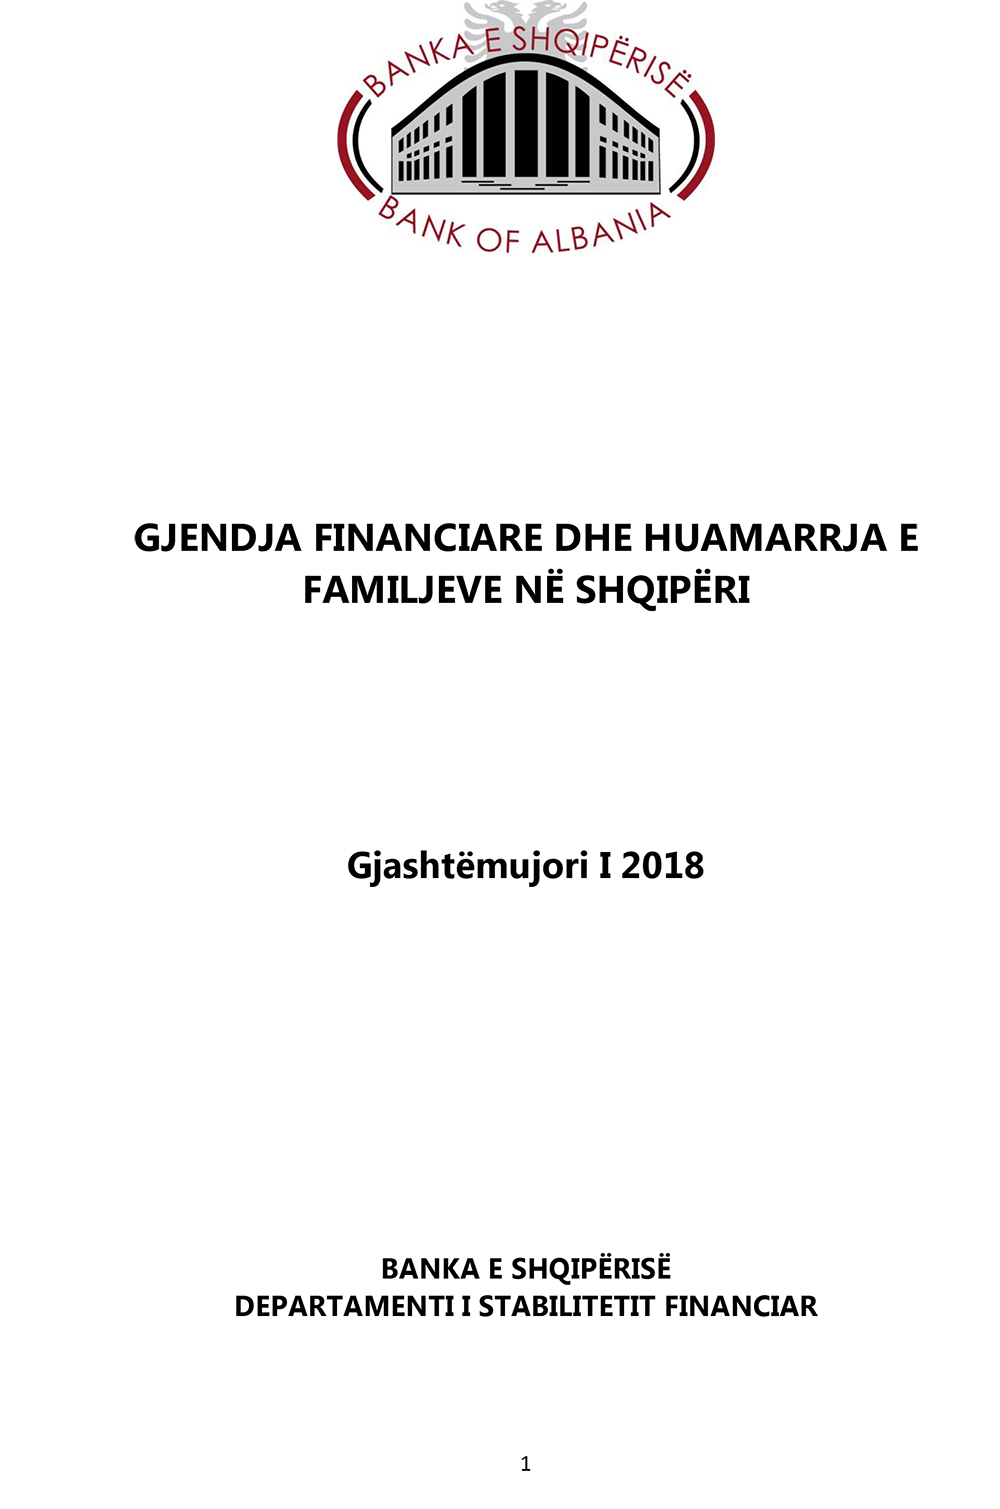 Survey on Financial situation and borrowing of households in Albania 2018 - H1